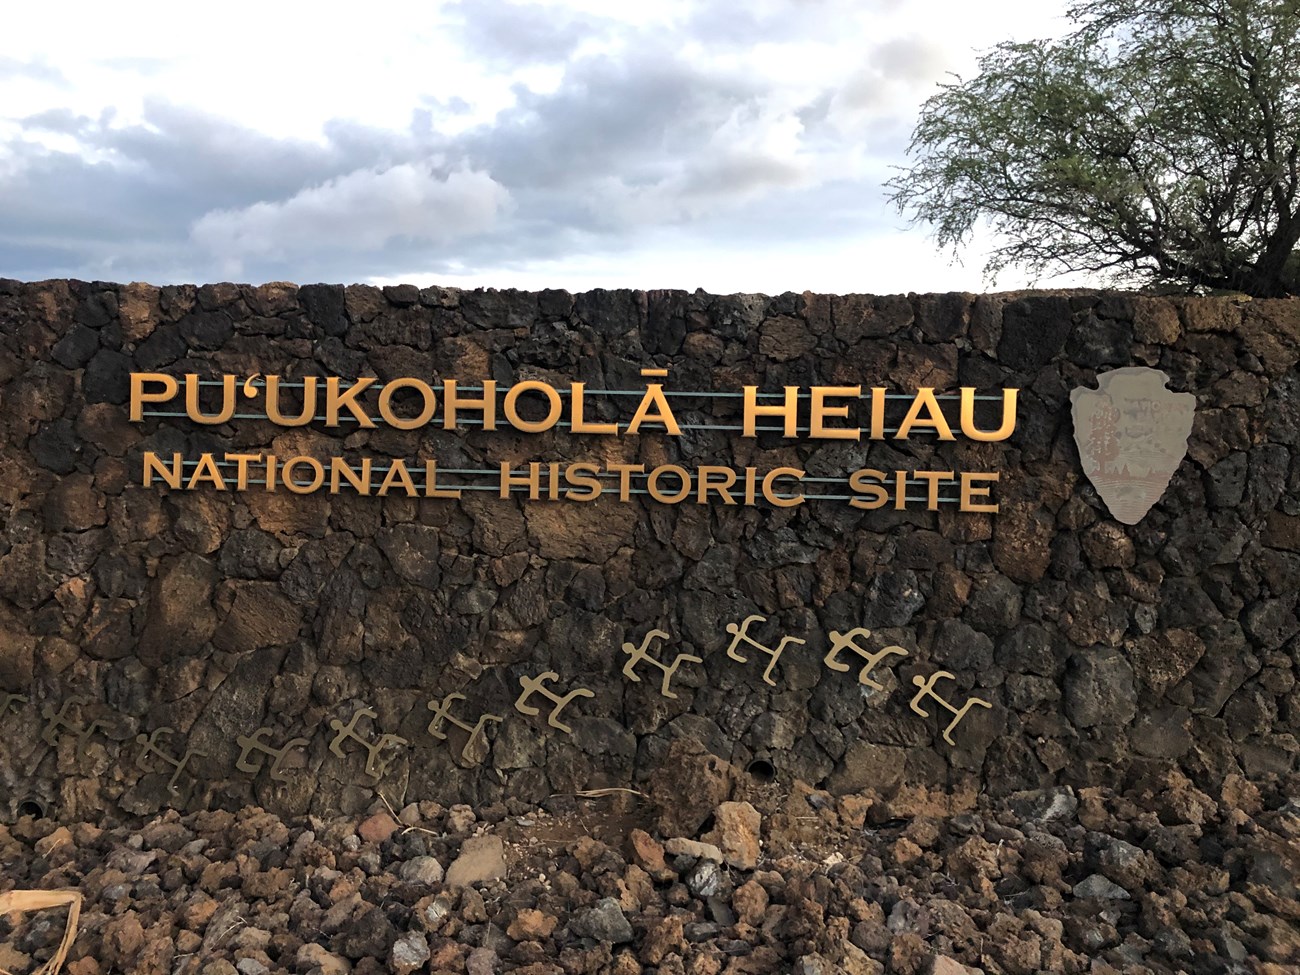 Park name displayed with petroglyphs and an arrowhead on the entrance wall to the visitor center.